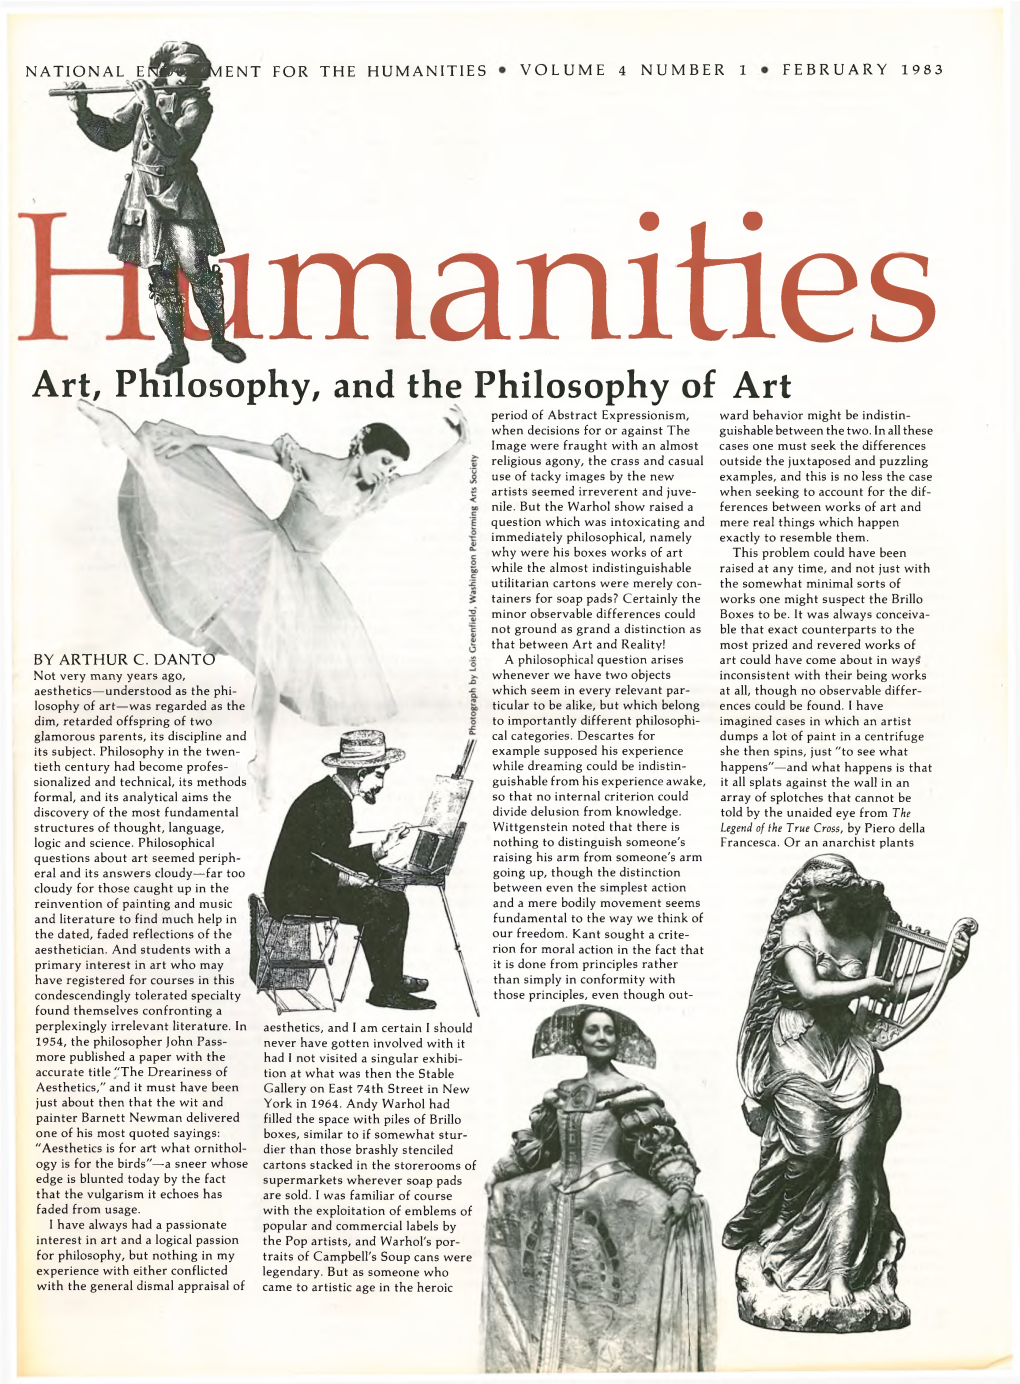 Art, Philosophy, and the Philosophy Of